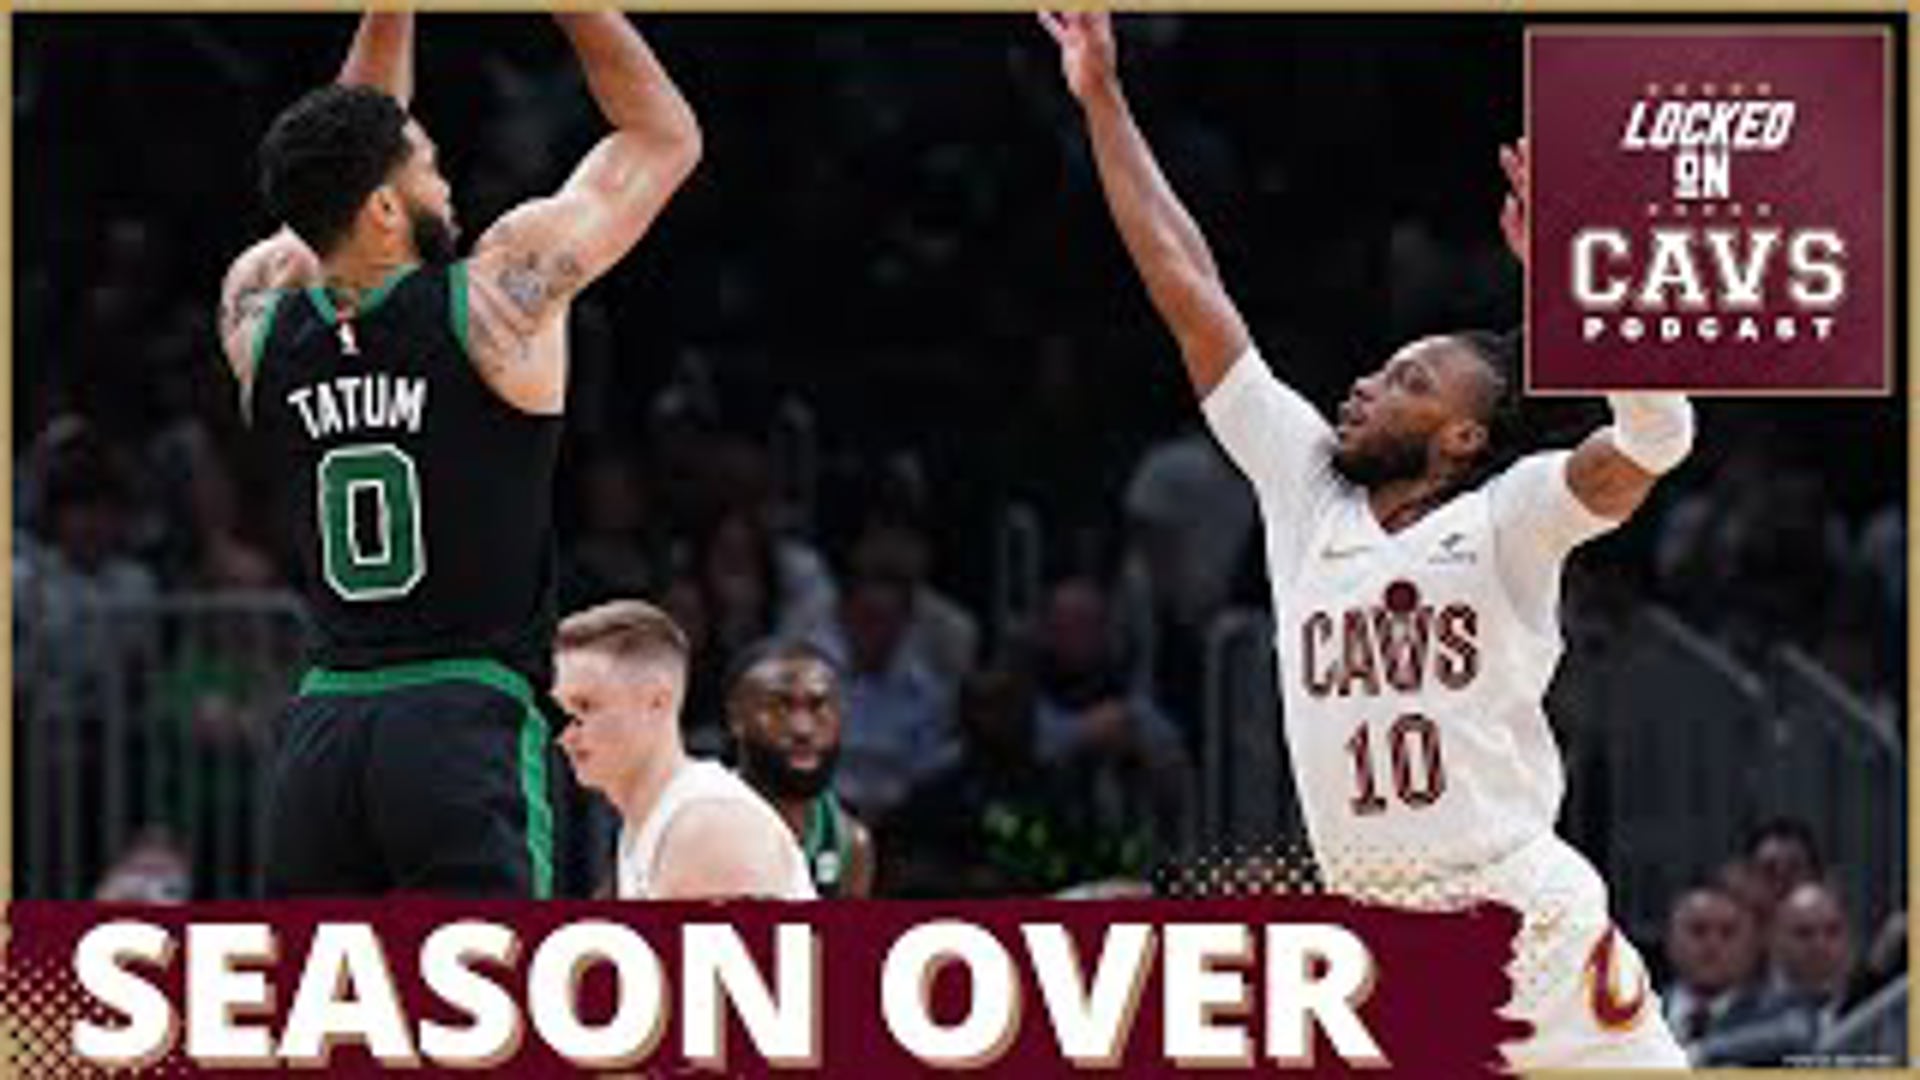 On a new episode of Locked on Cavs, hosts Chris Manning and Evan Dammarrell dive into the Cavs' Game 4 loss to the Celtics and how they played without Mitchell.